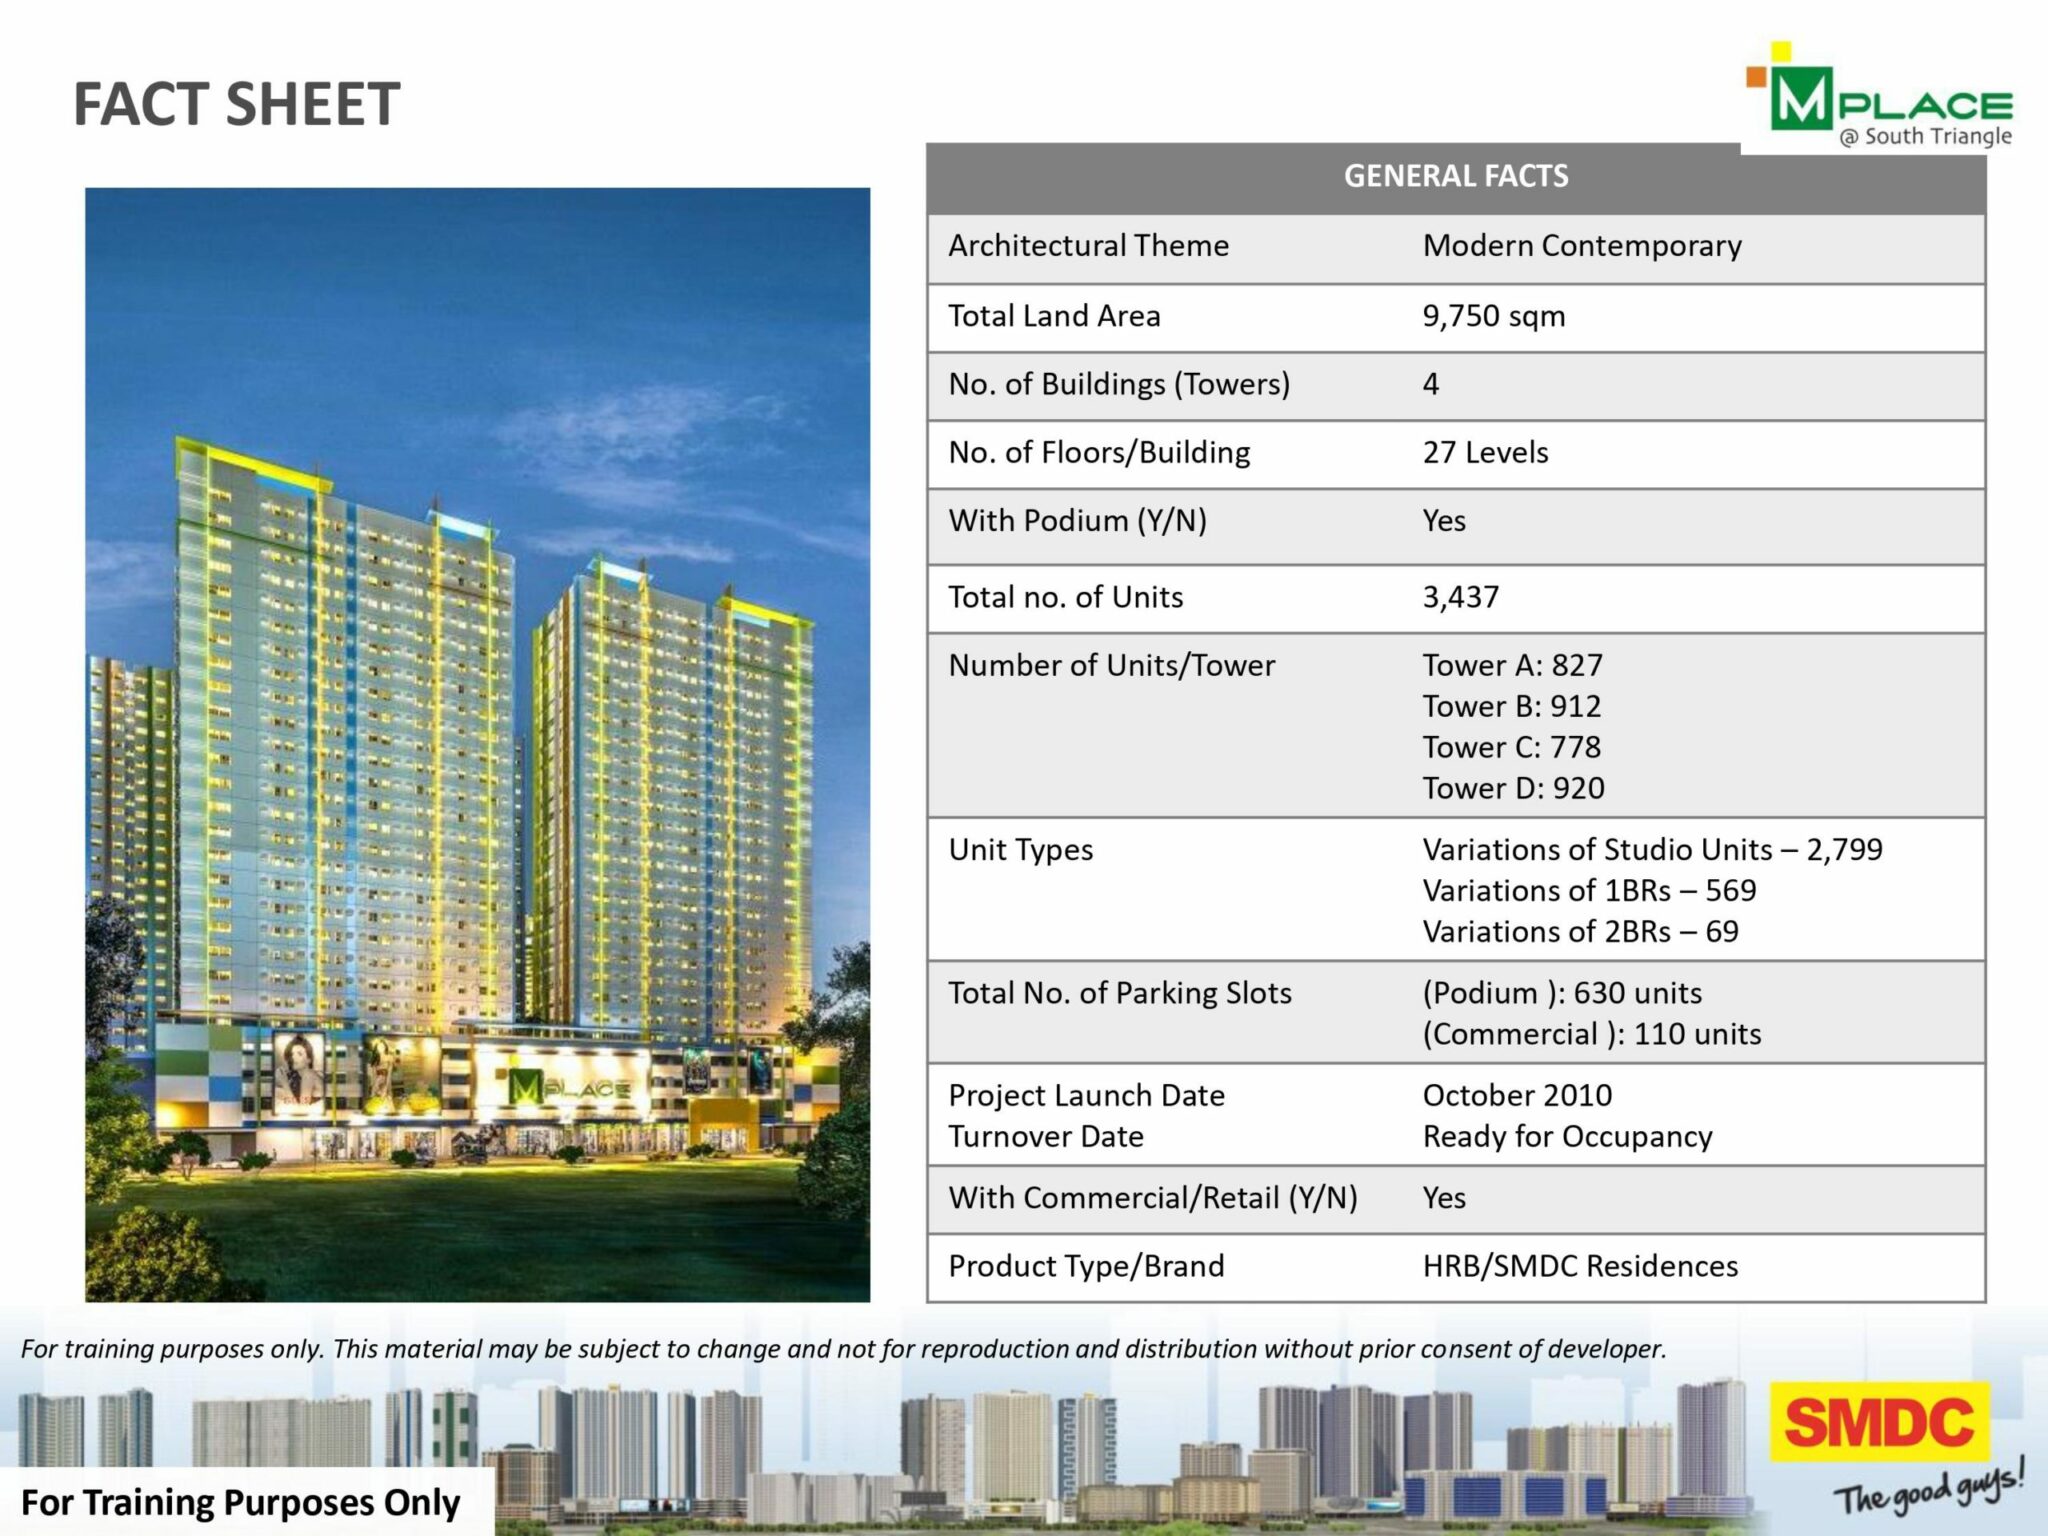 5% Down Only To Move in Condo in SMDC M Place. RENT TO OWN TERMS